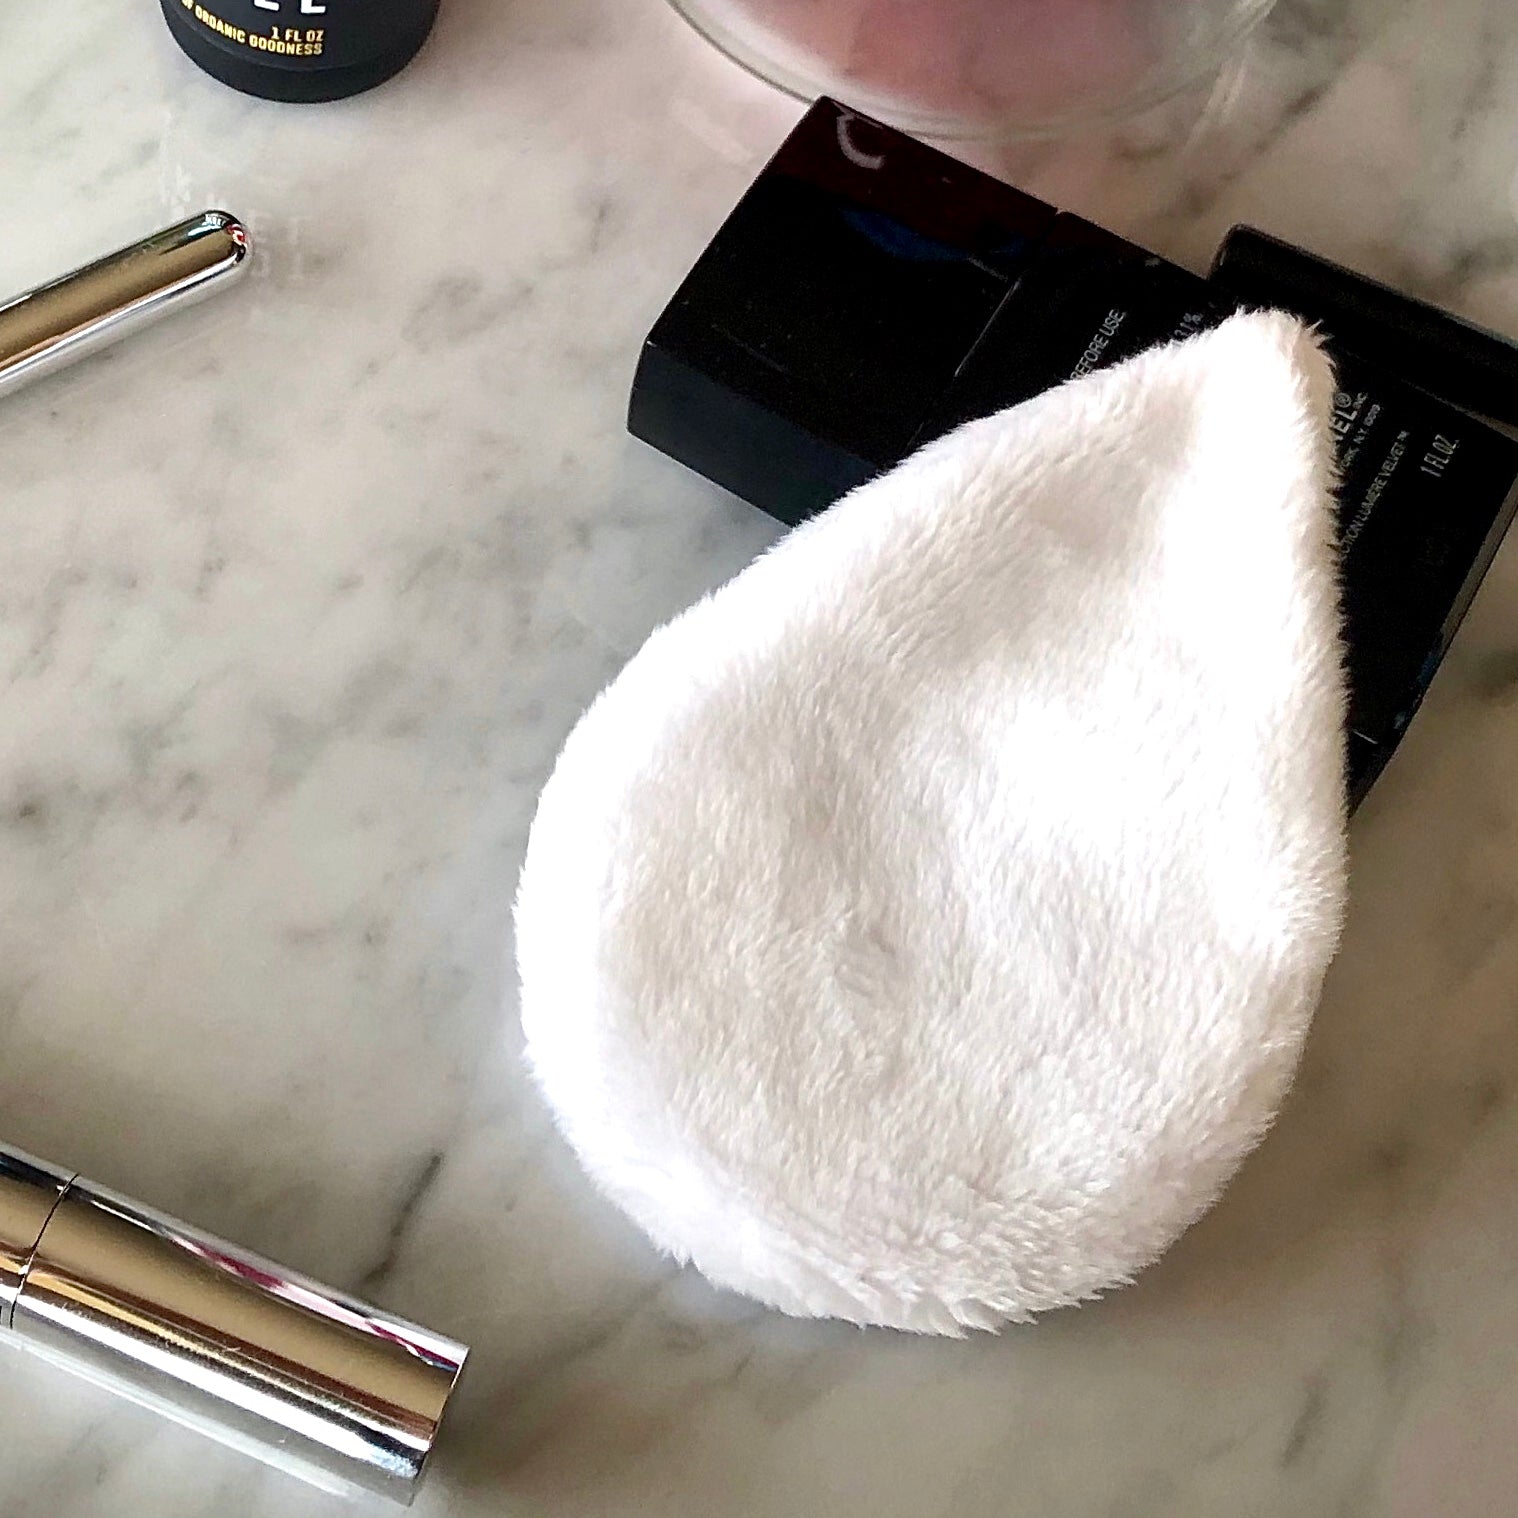 The Mitty Mini works with your skincare